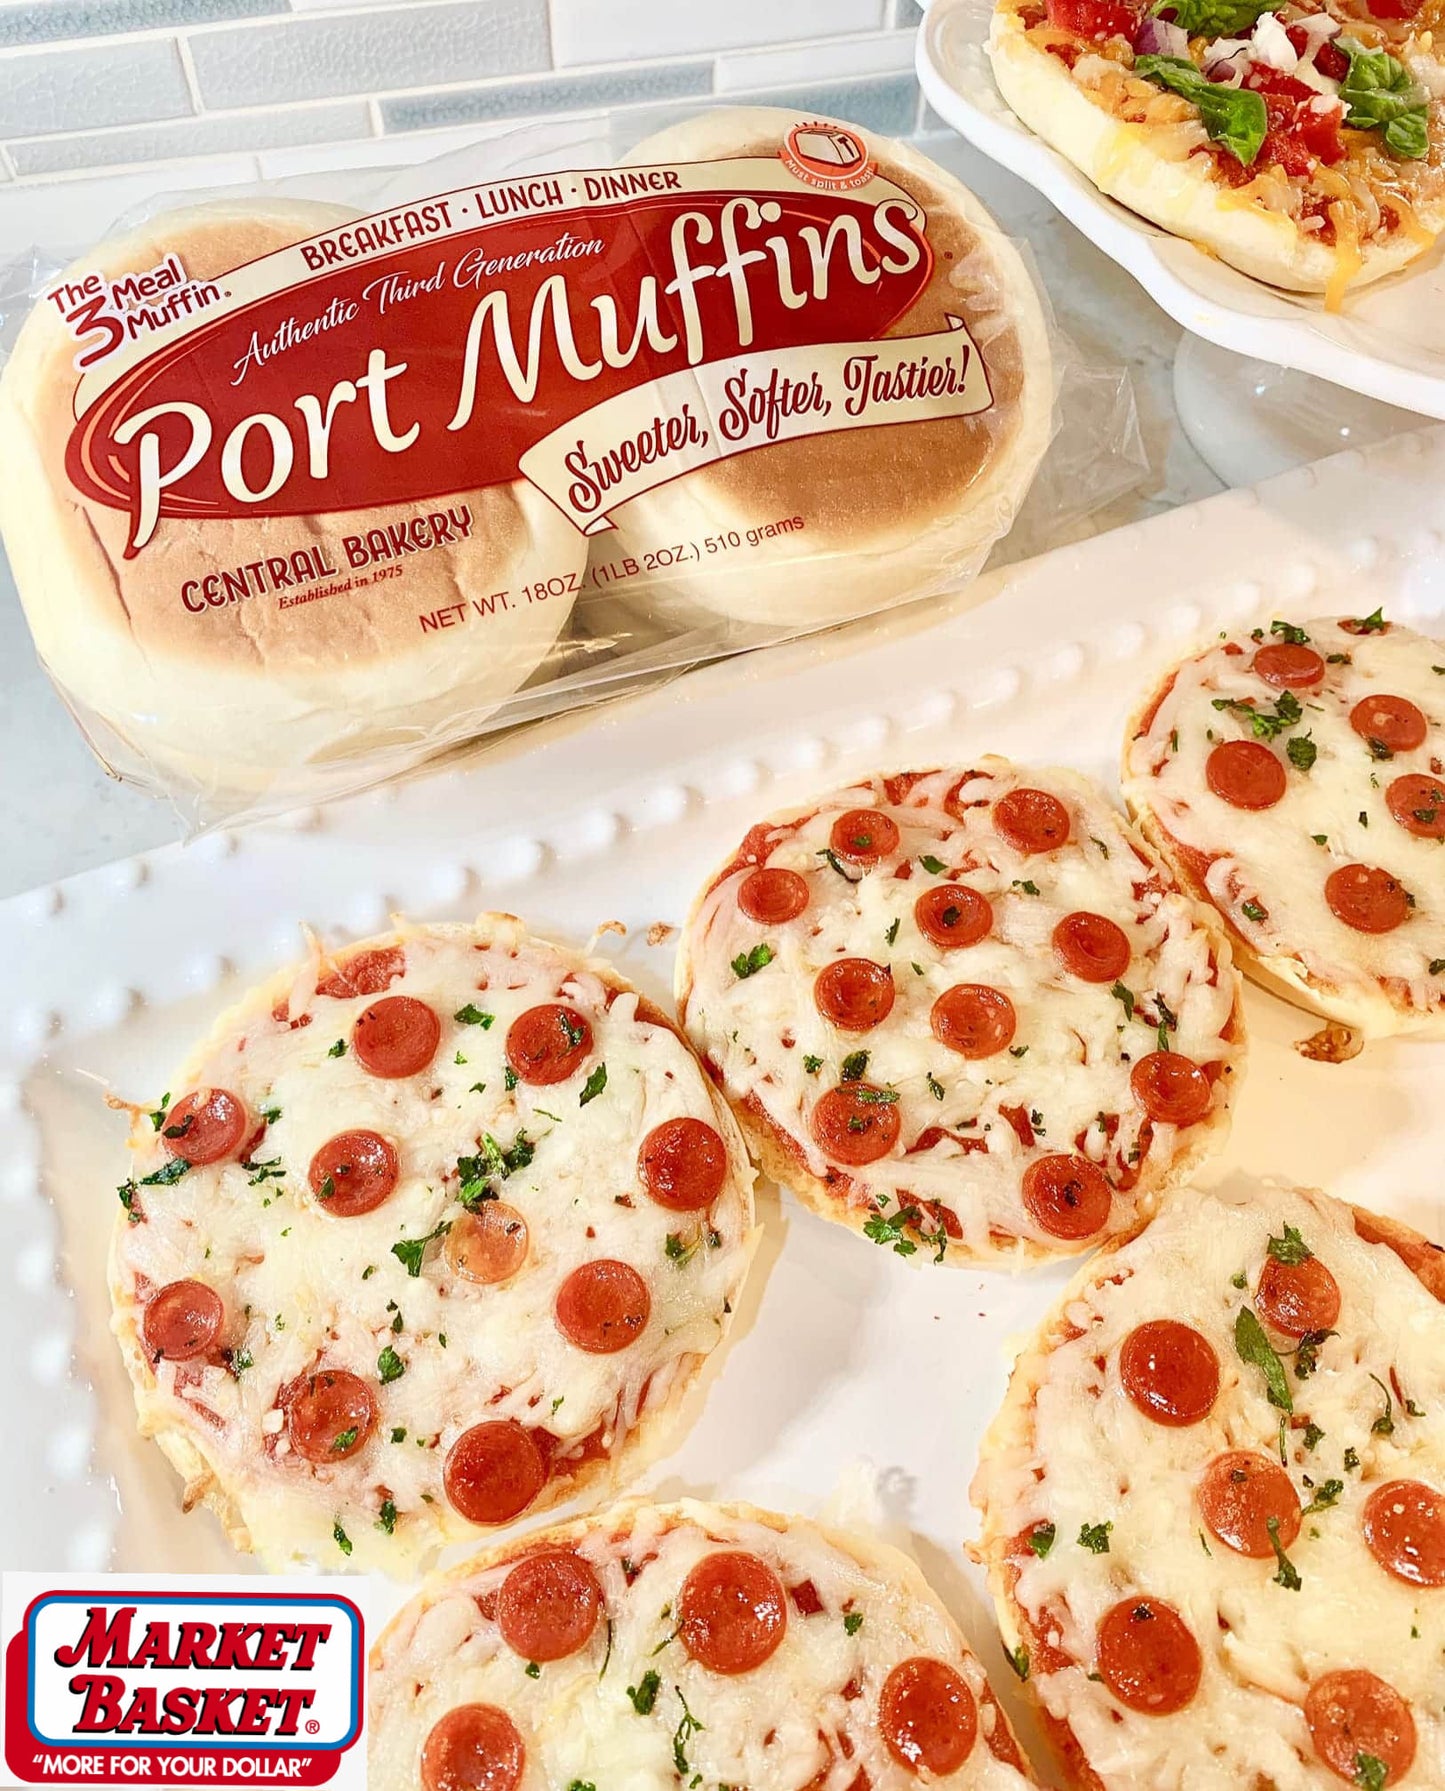 Authentic Port Muffin: The Perfect Meal Companion